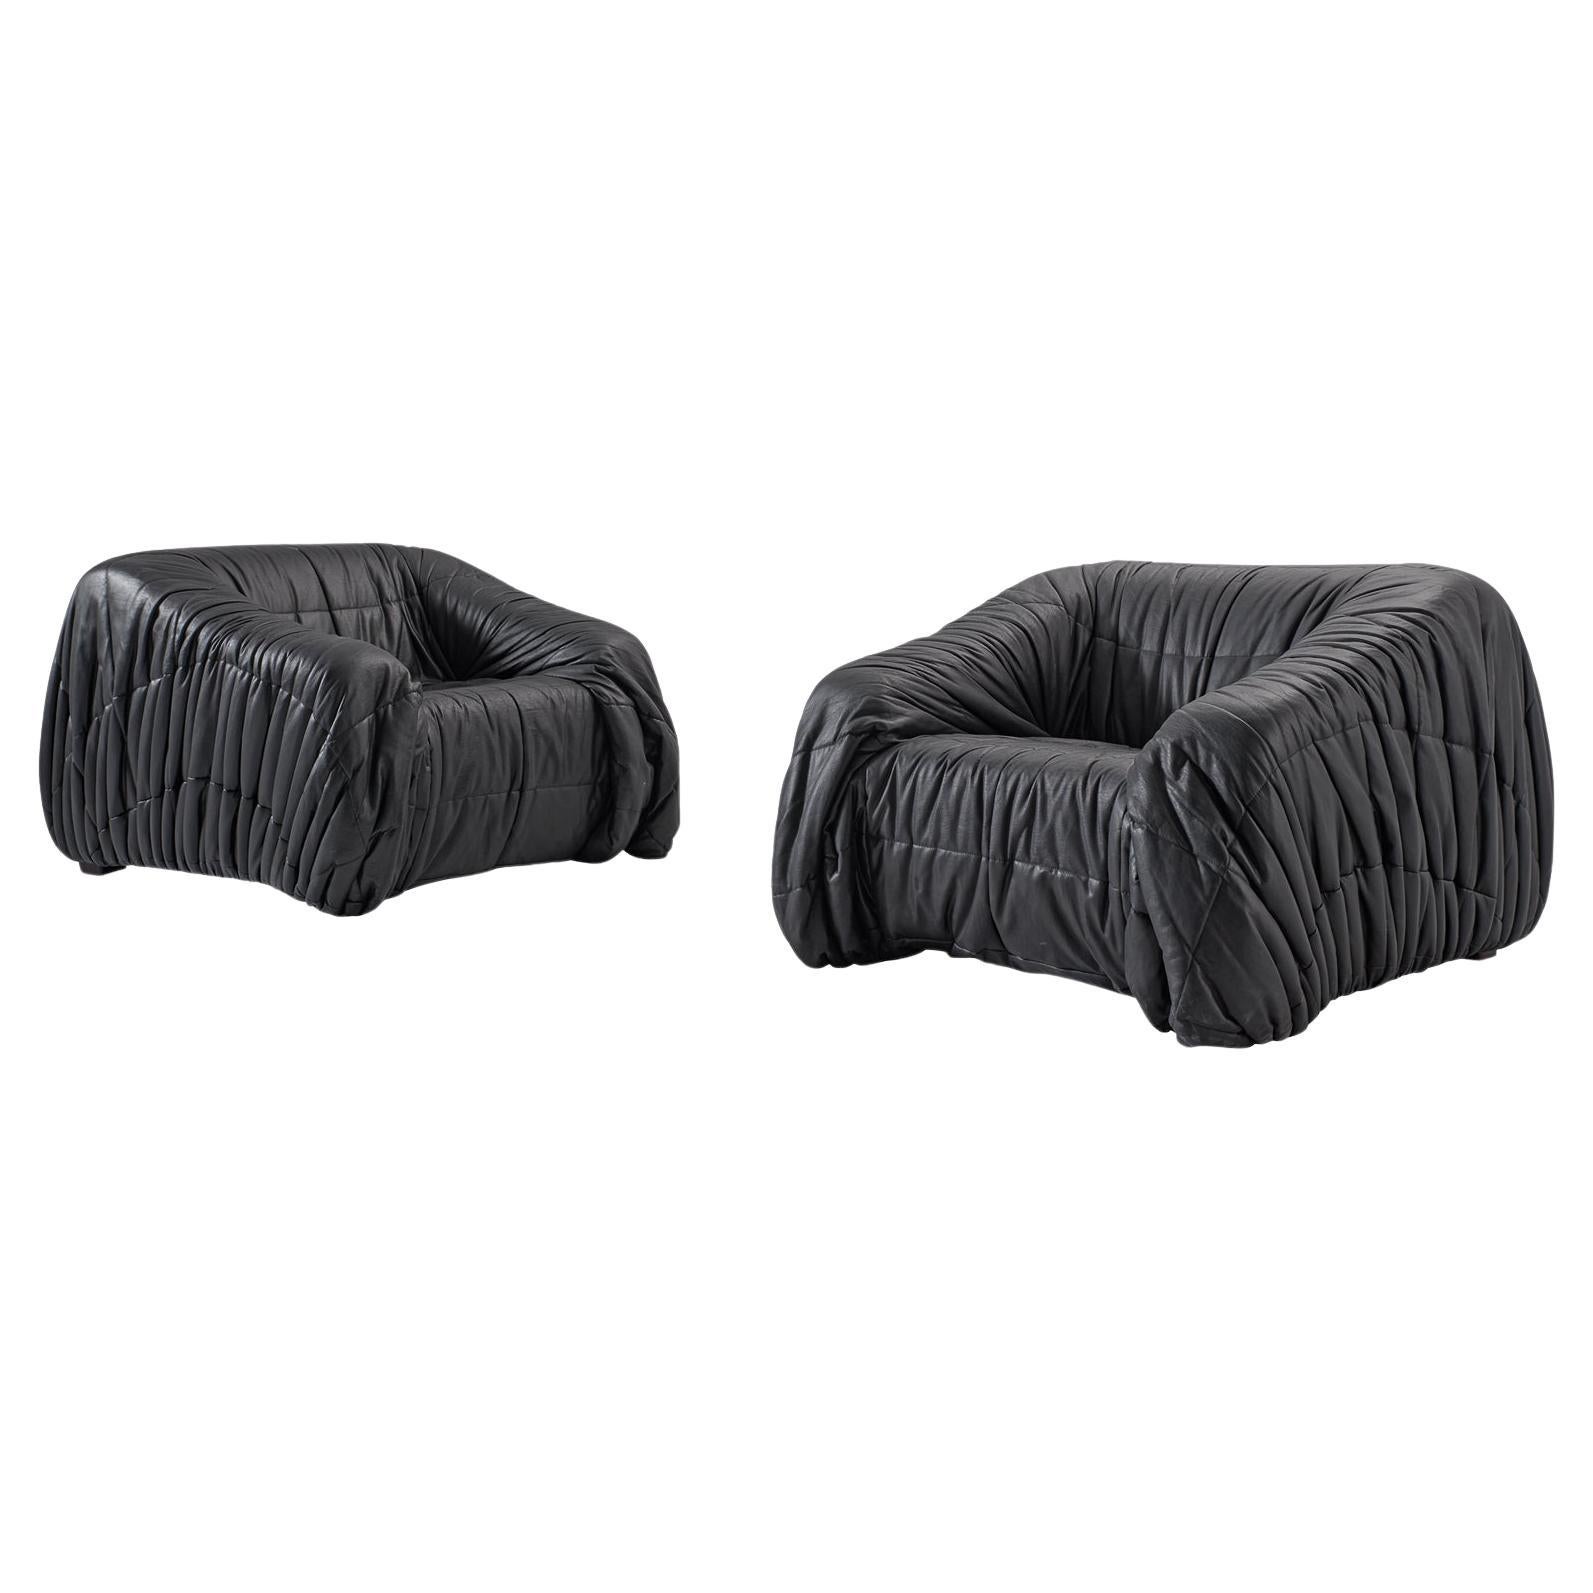 De Pas, D'urbino and Lomazzi Pair of Lounge Chairs in Black Leatherette For Sale